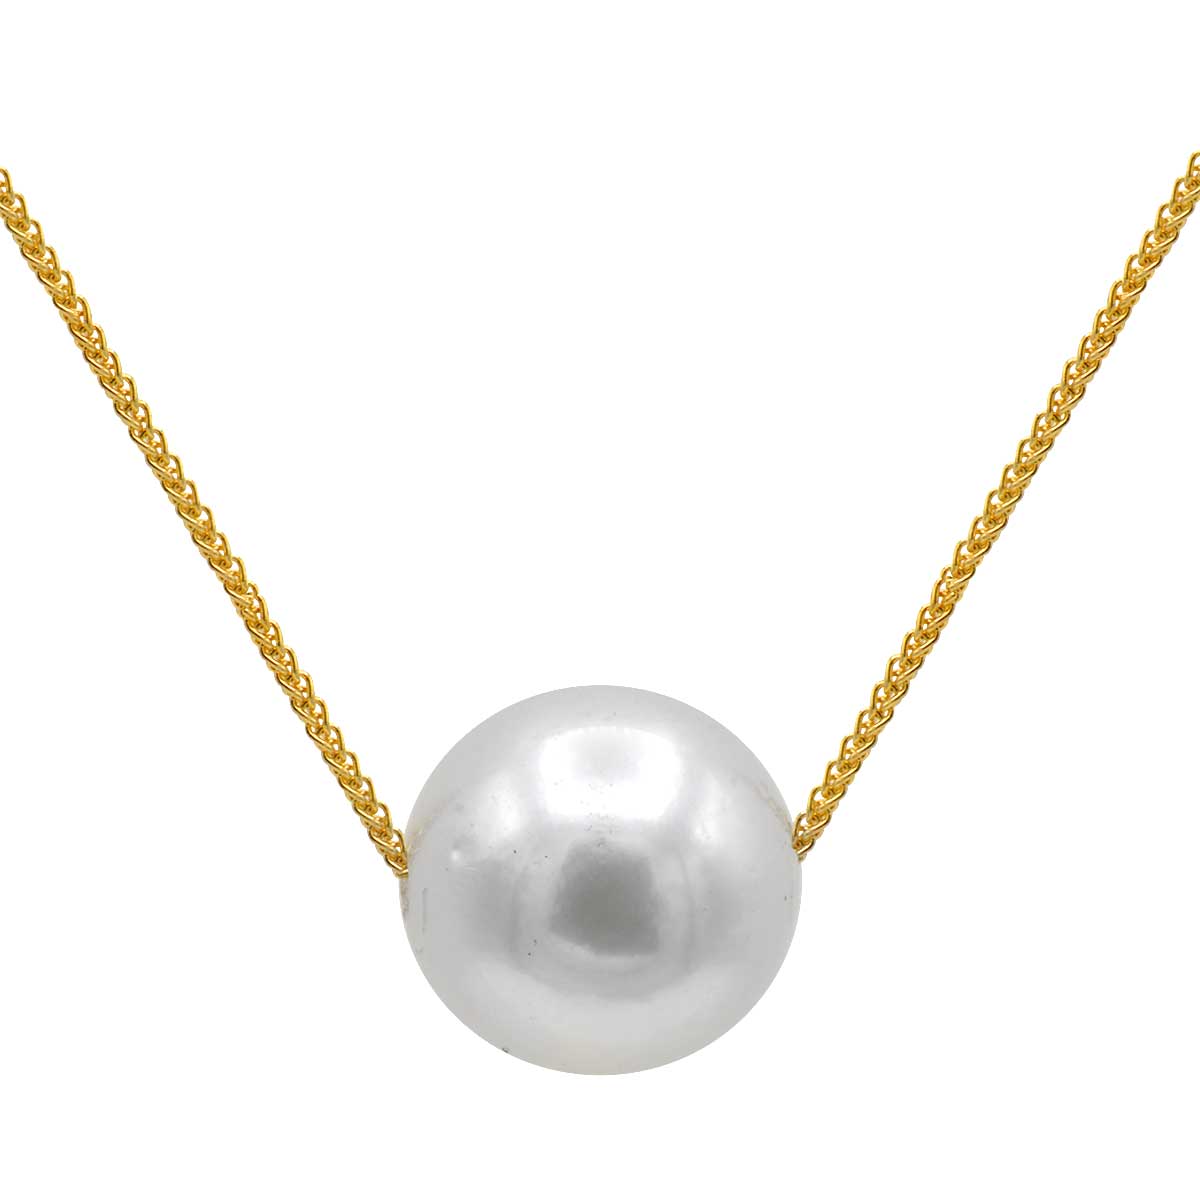 18KY White South Sea Pearl Pendant, 11-12mm